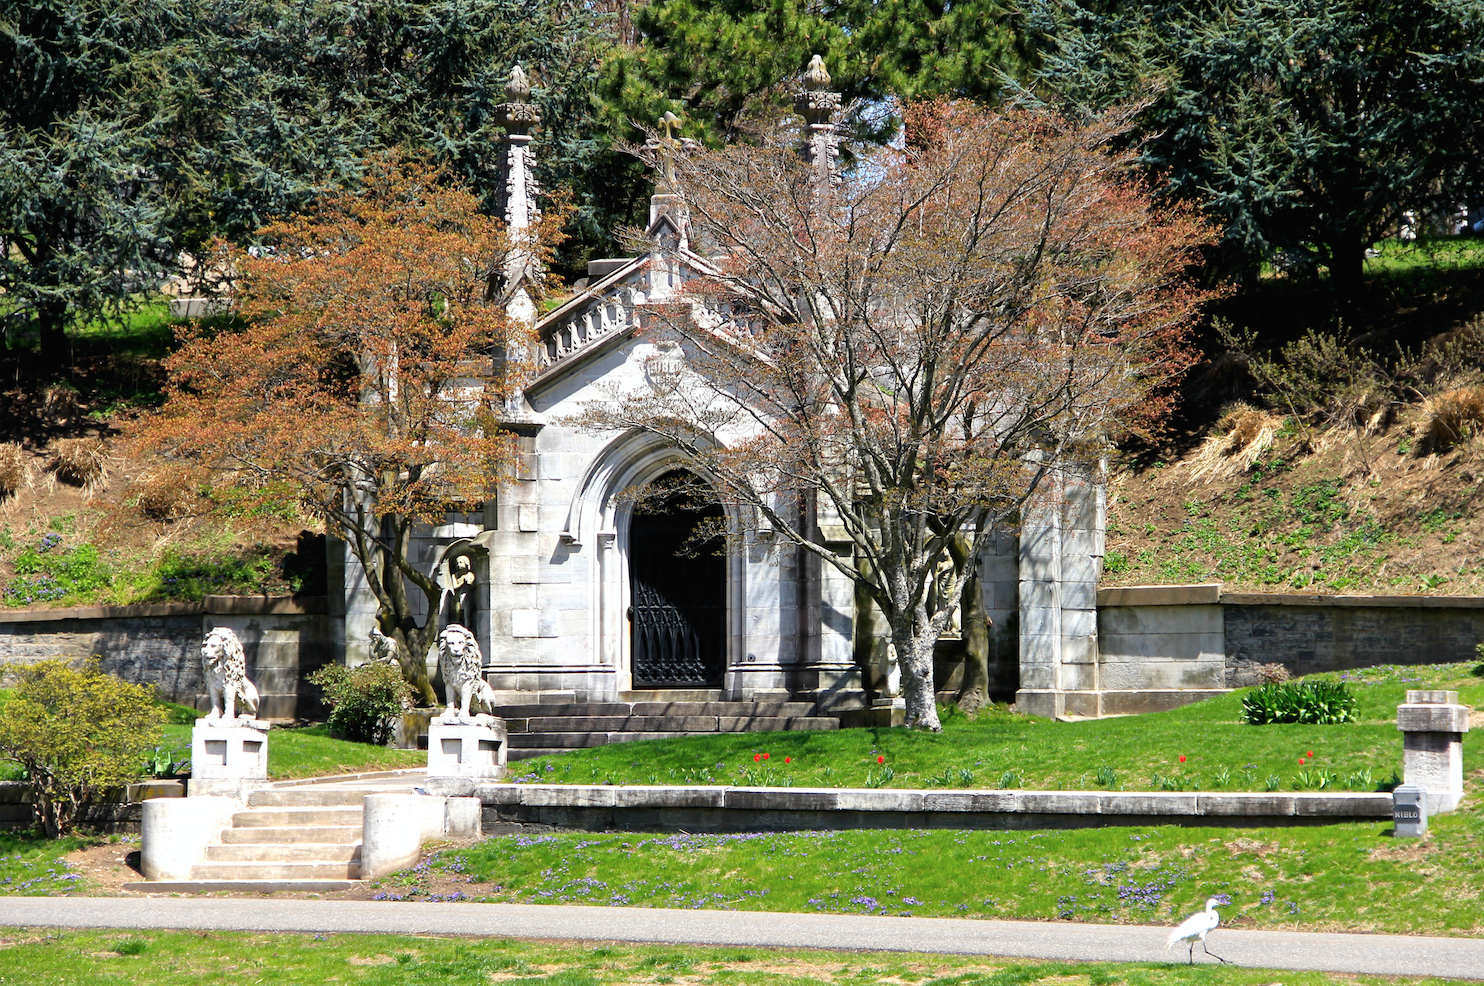 Get an exclusive look inside a giant mausoleum at Green-Wood Cemetery this weekend